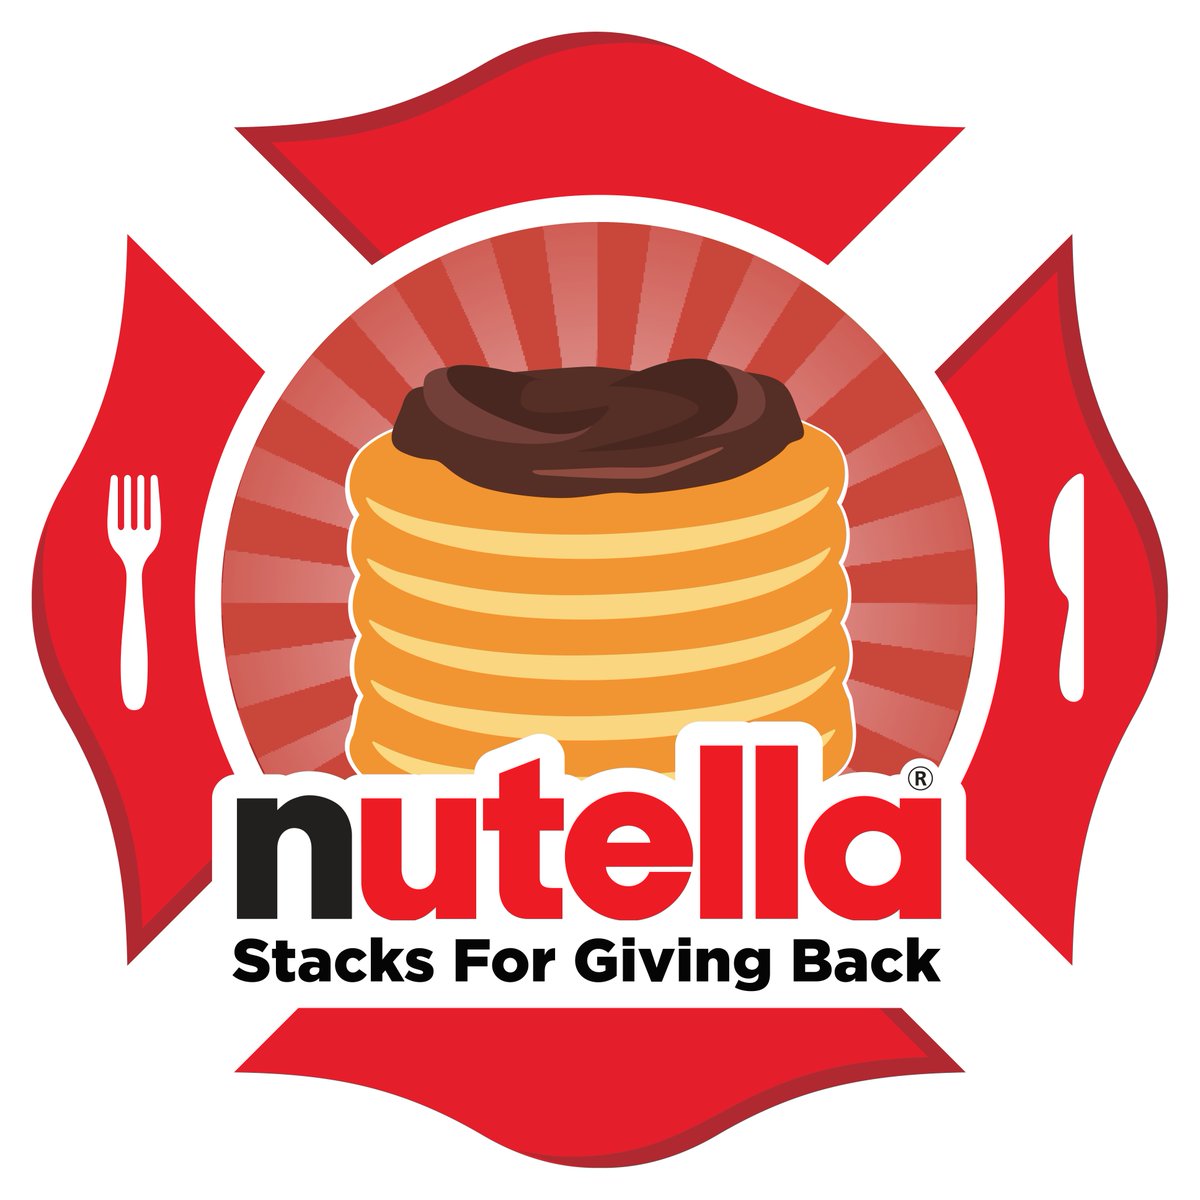 Grants available for volunteer fire departments! @NutellaUSA is honoring local fire departments through the Stacks for Giving Back program. Apply for a chance to be selected for a $5,000 fire department grant: nvfc.org/nutellastacksf…